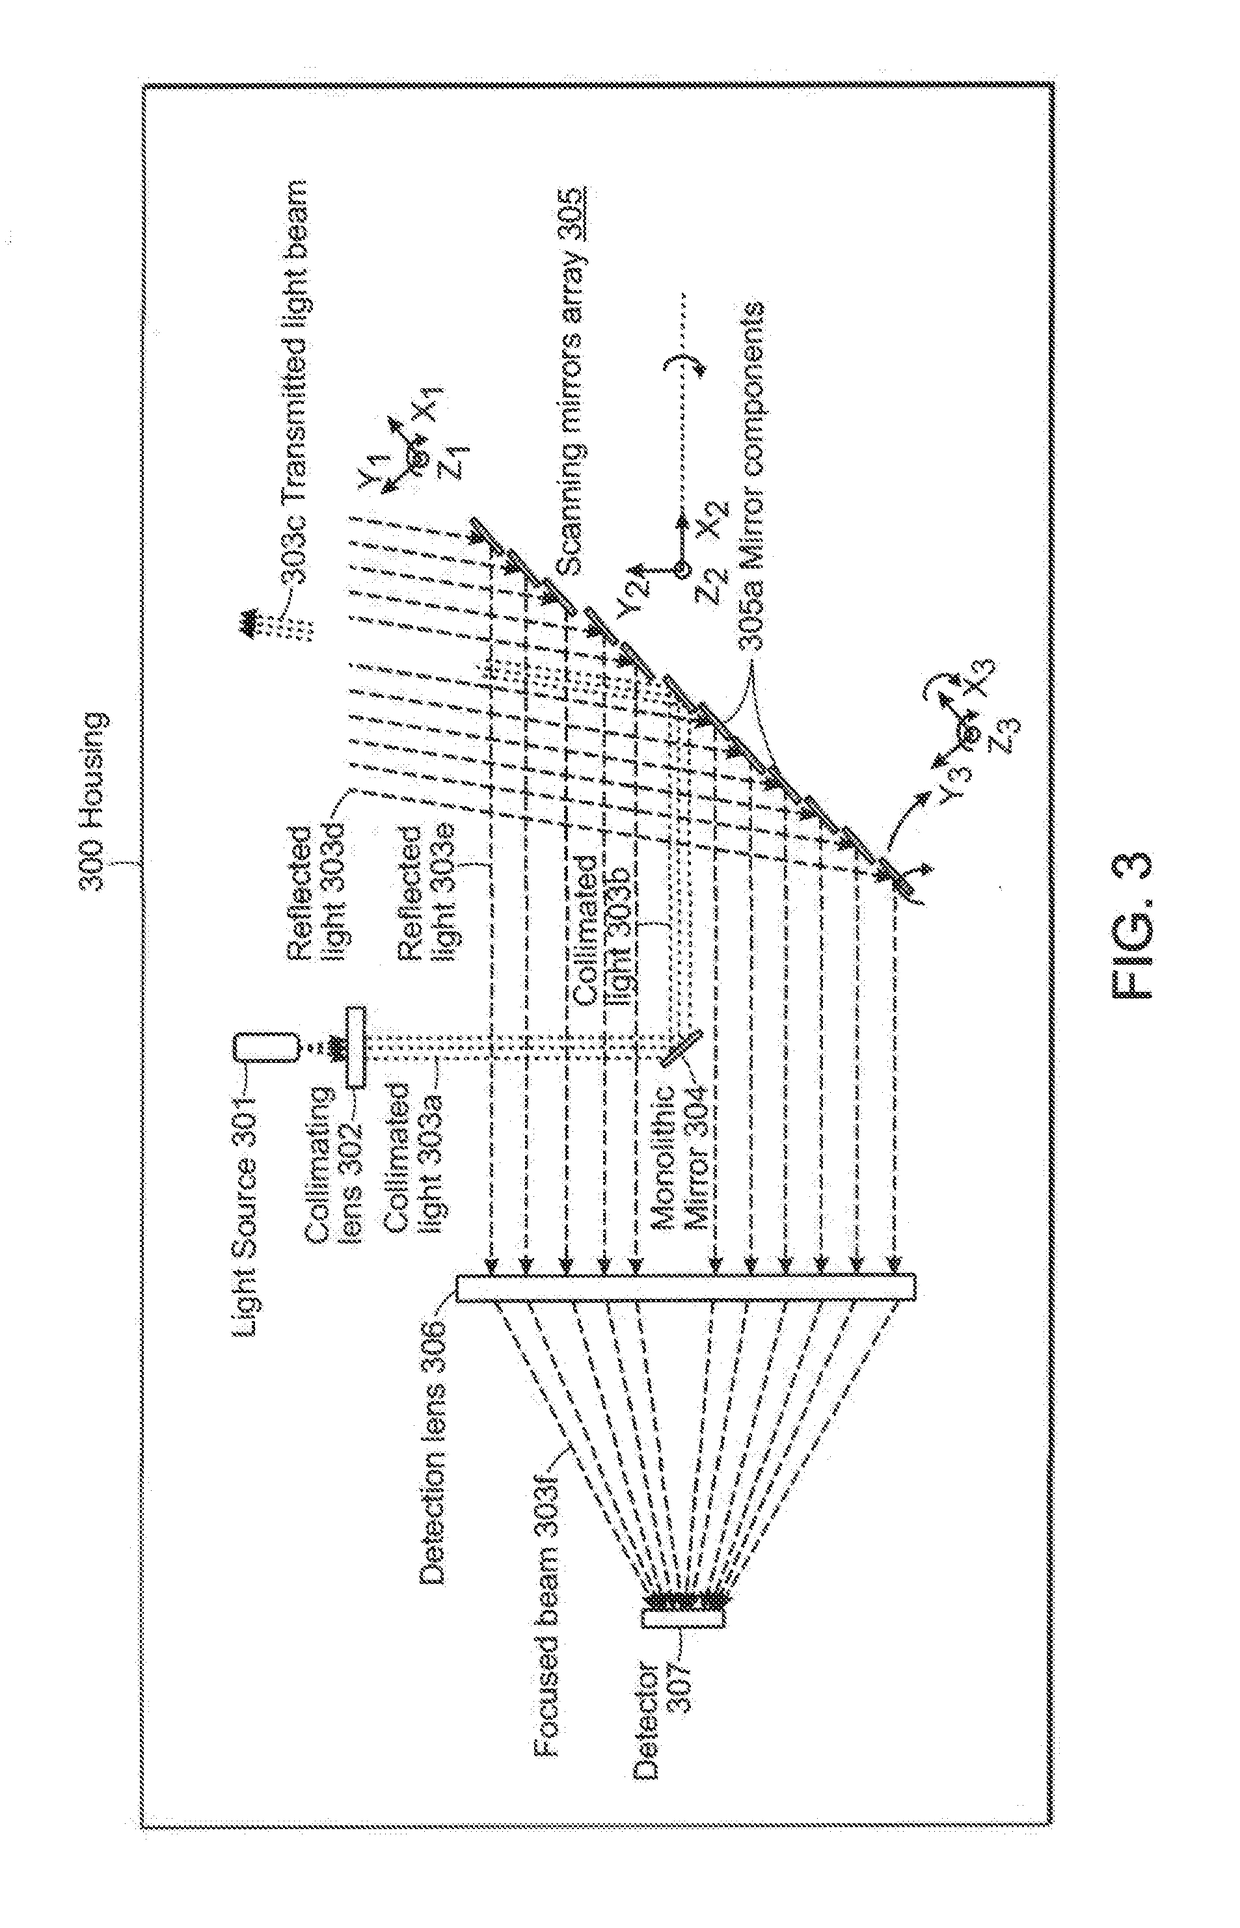 LIDAR Device Based on Scanning Mirrors Array and Multi-Frequency Laser Modulation